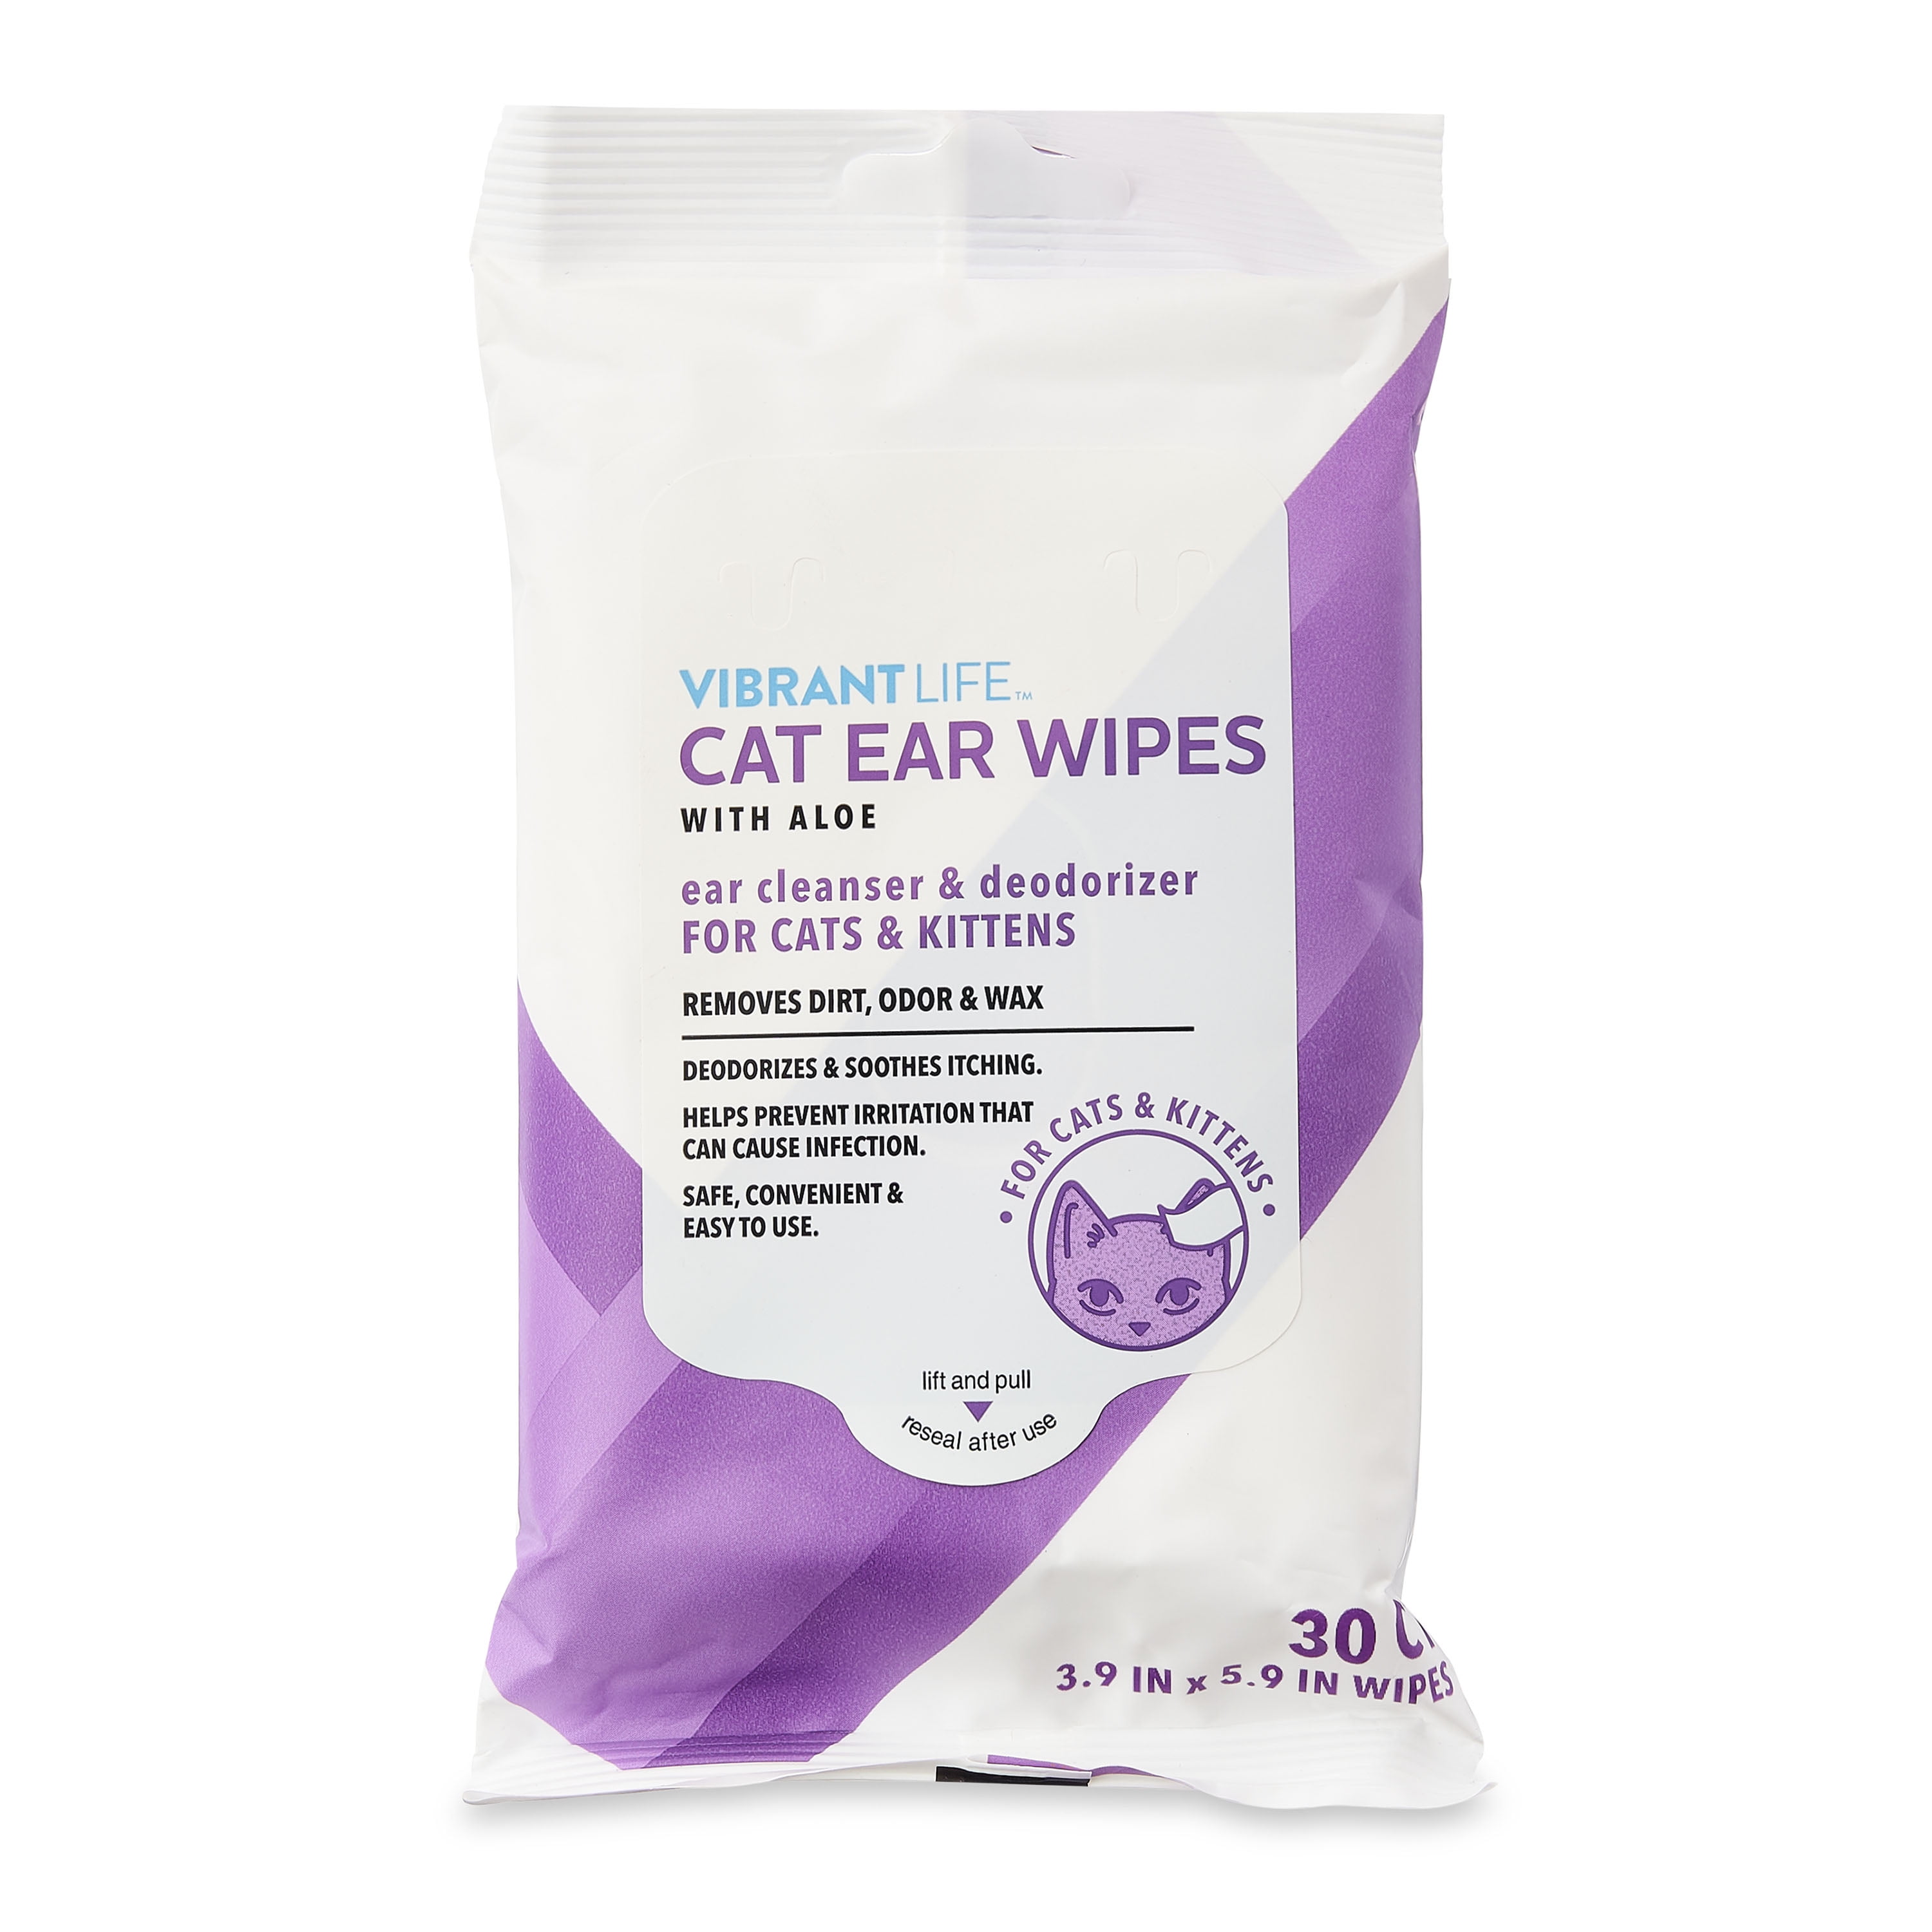 Vibrant Life Cat Ear Wipes with Aloe, 30 Count